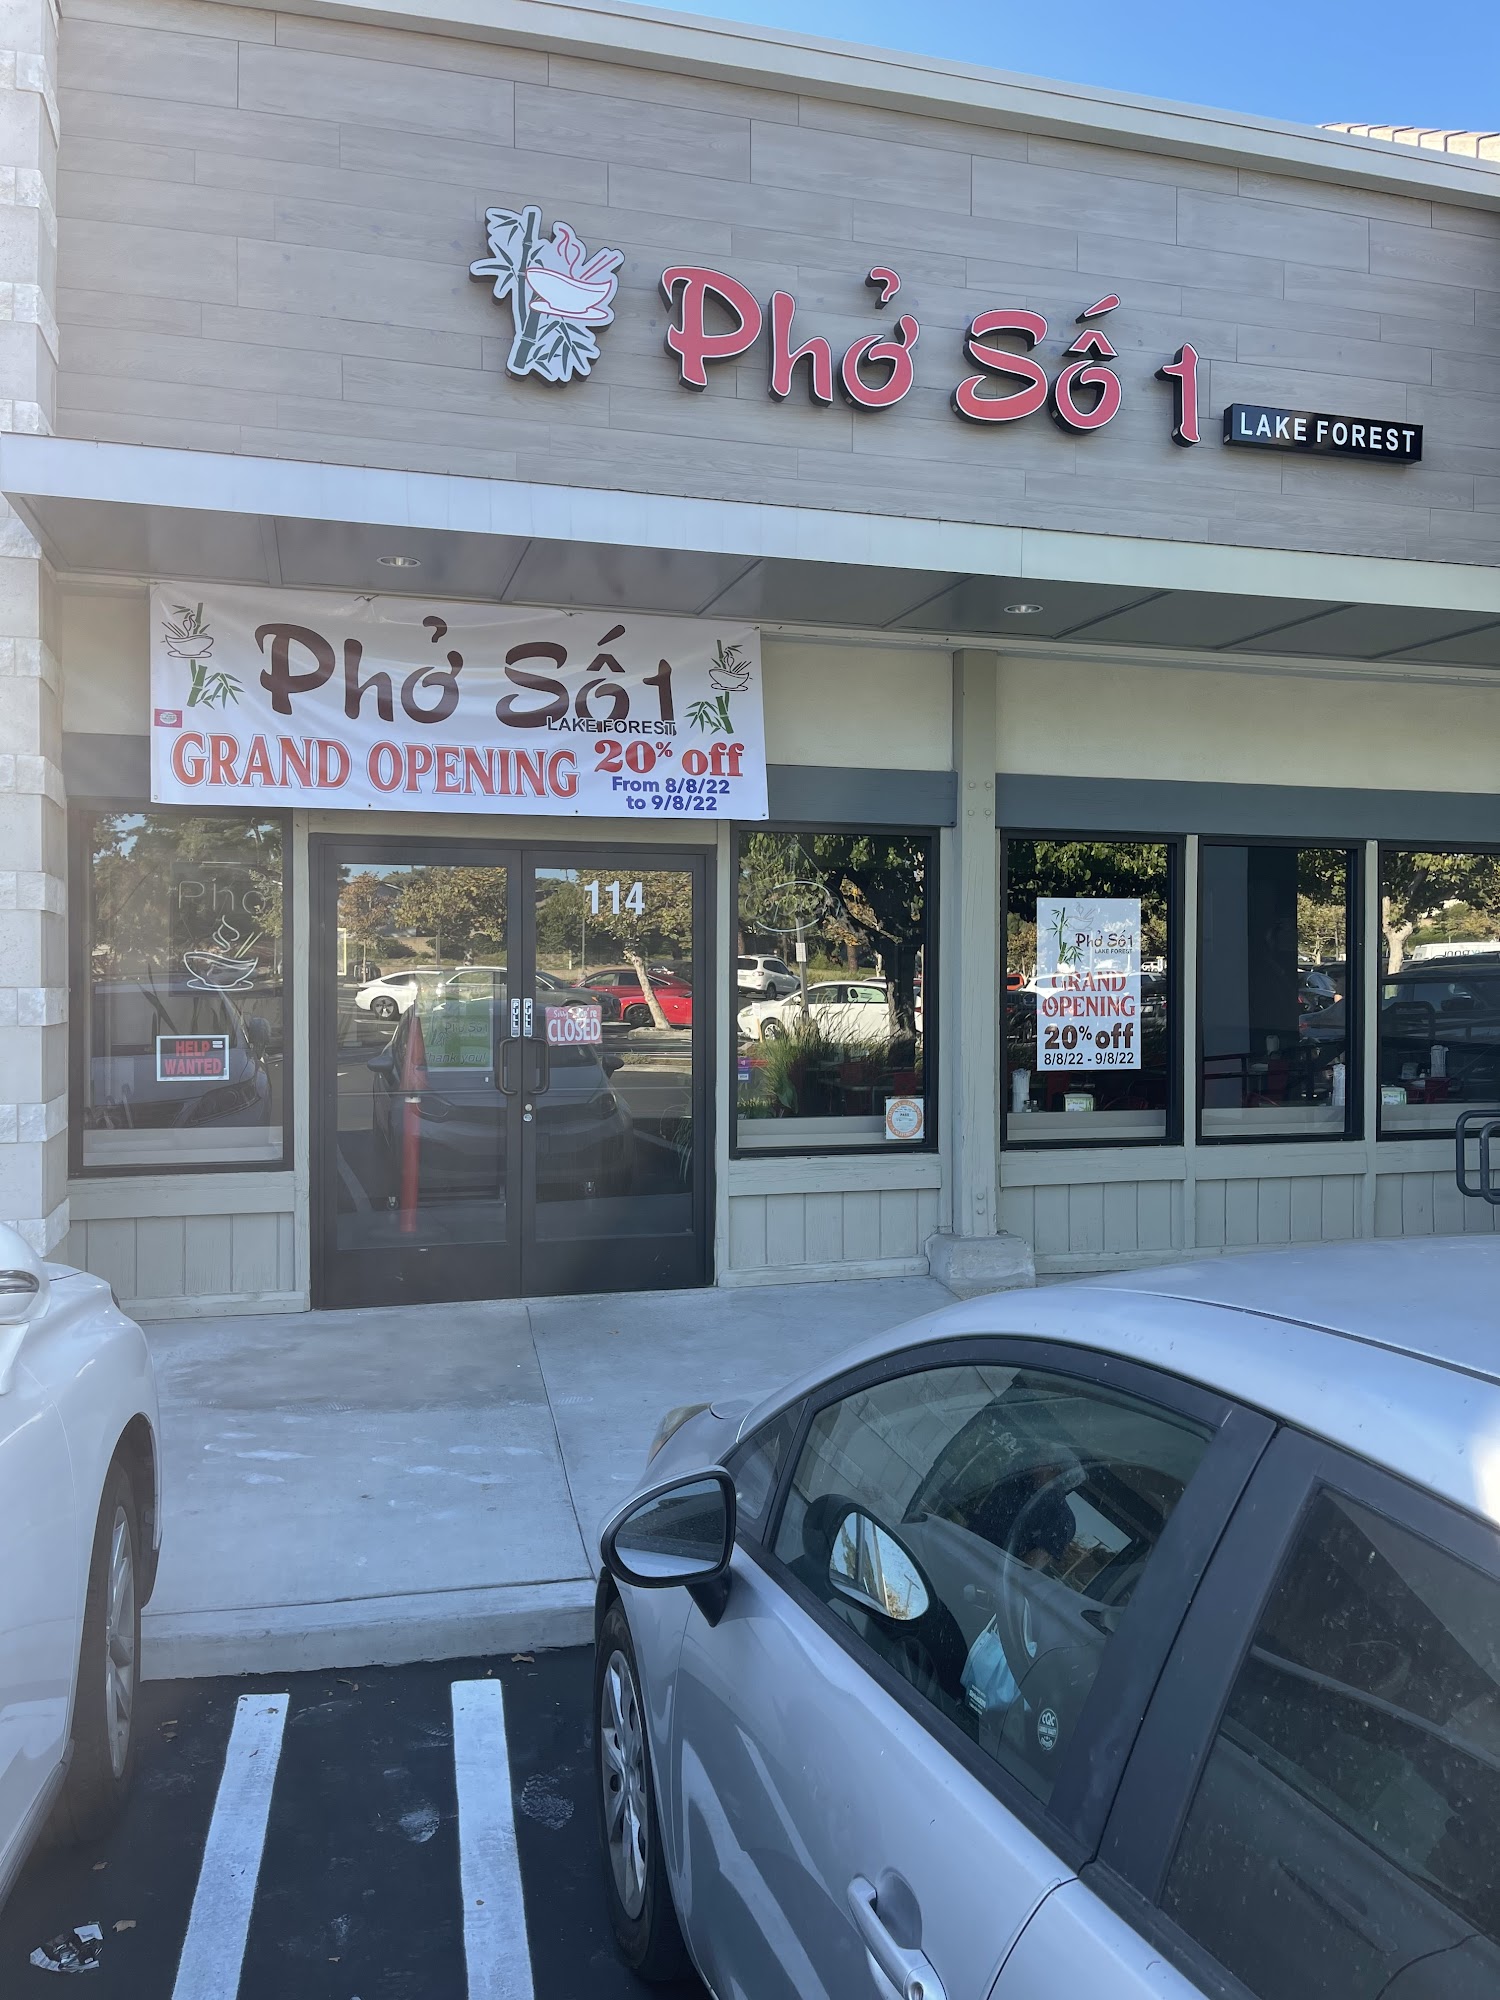 Pho So 1 Lake Forest